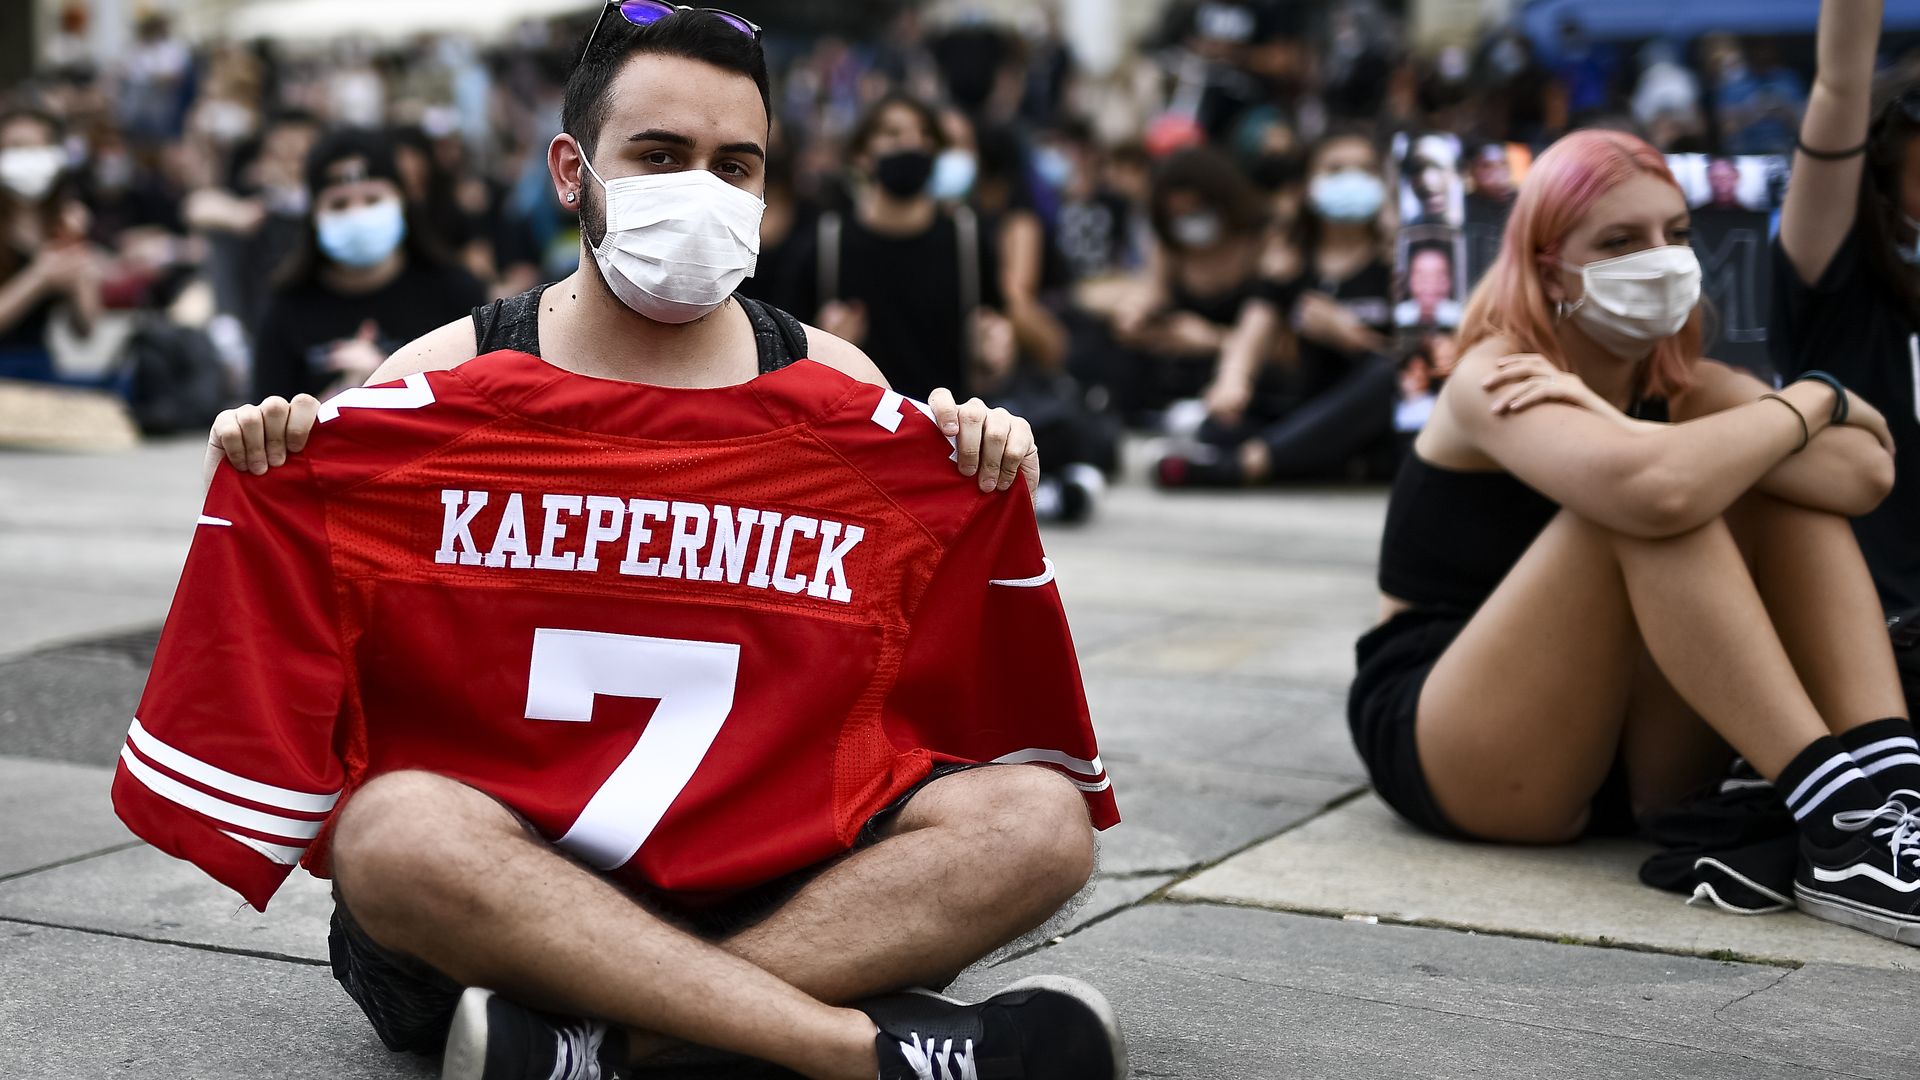 A protester holds a red jersey with the number 7 and "Kaepernick" on it 